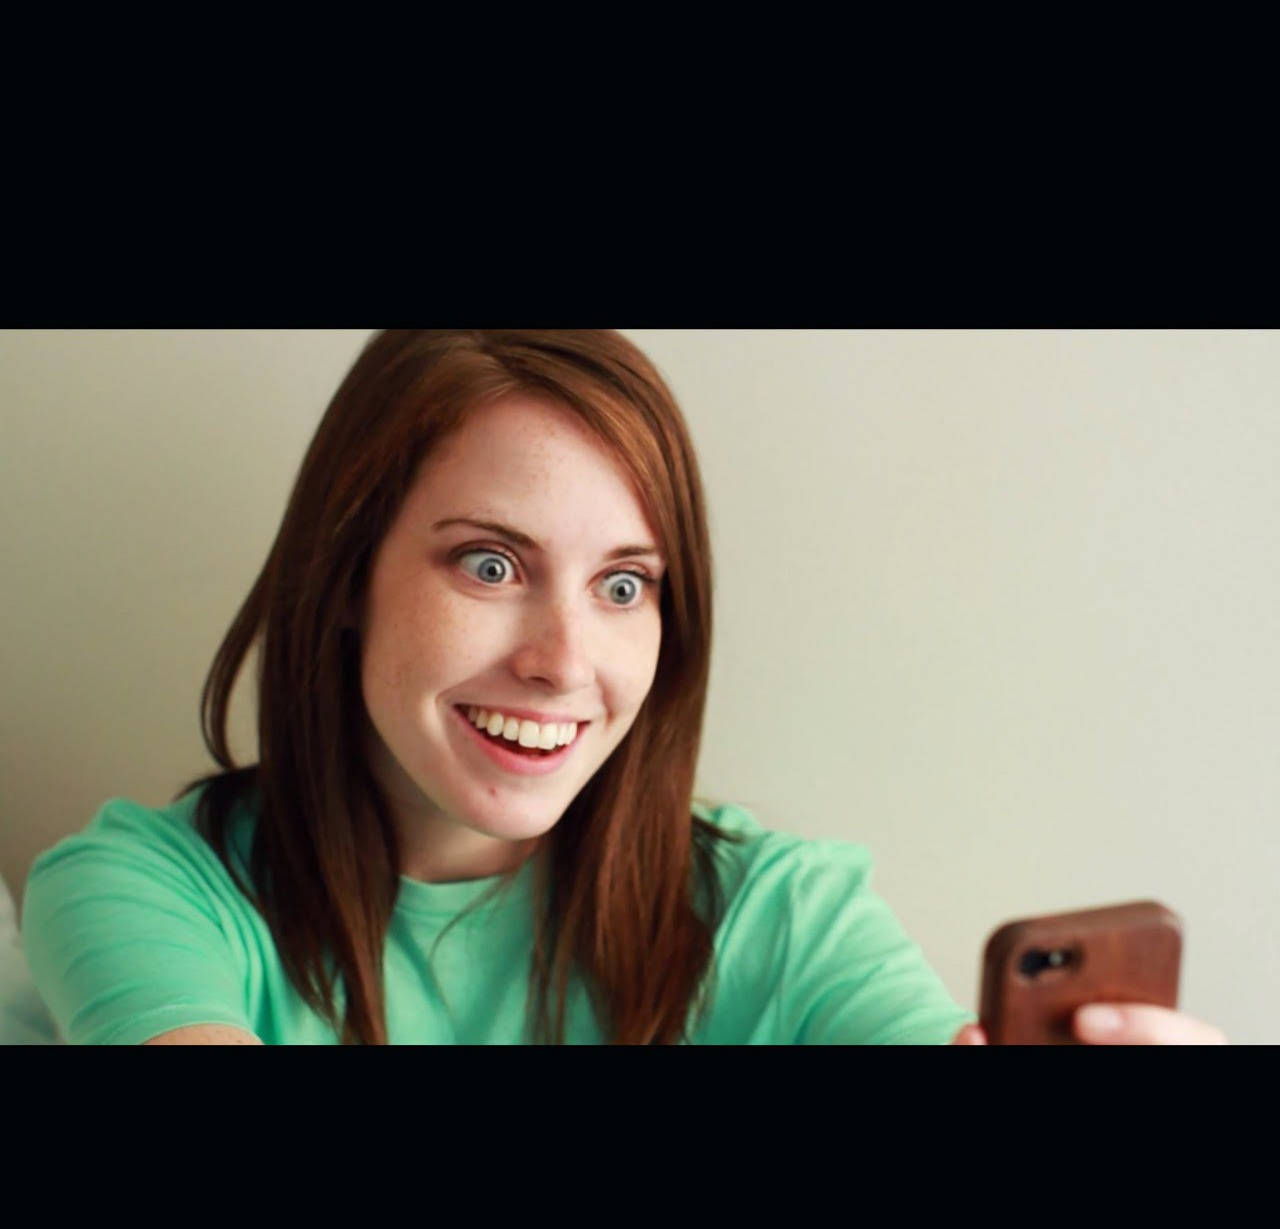 High Quality Overly attached girlfriend Blank Meme Template